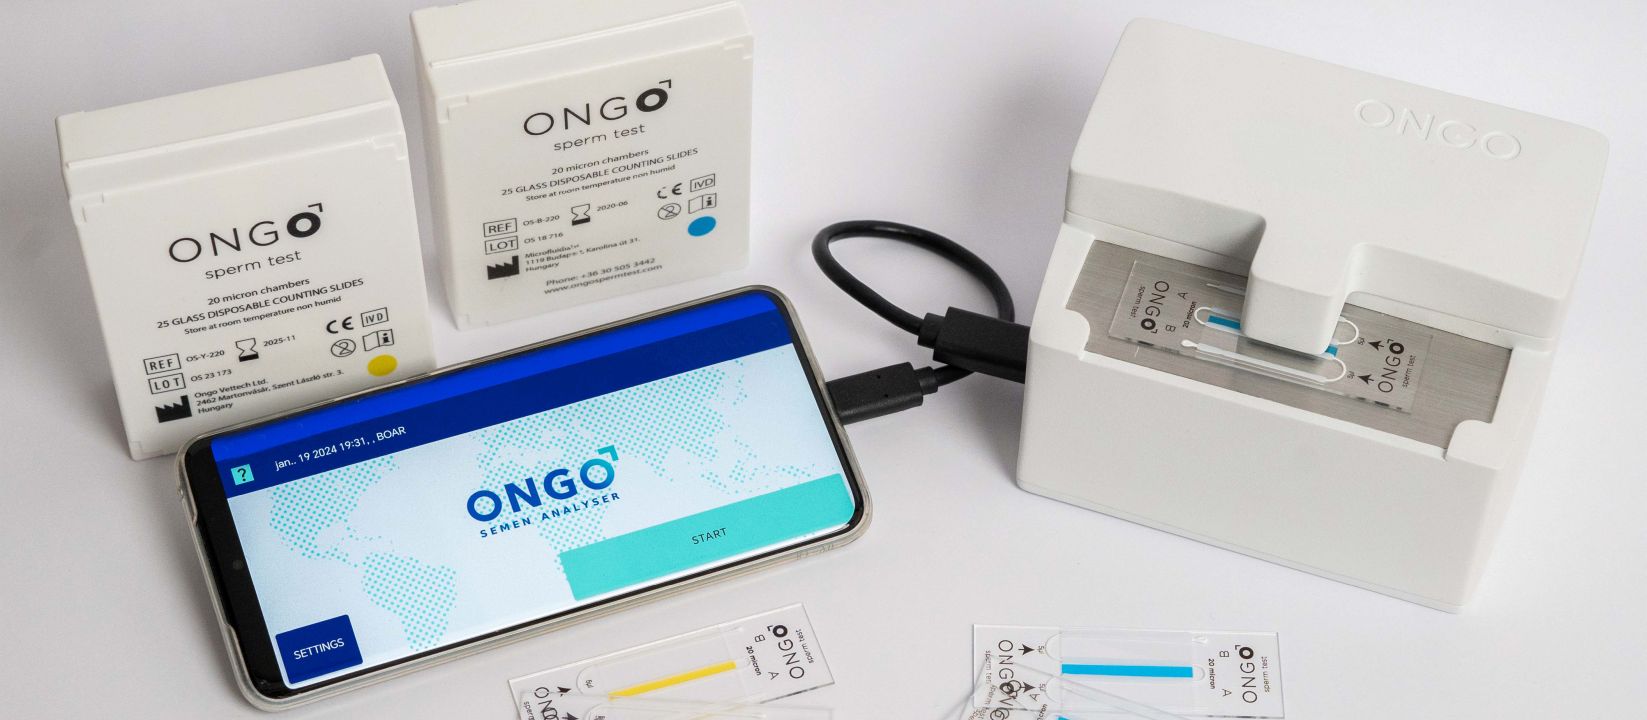 ONGO VISION mobile semen analyser unit with smartphone from www.ongovettech.com on First Slide